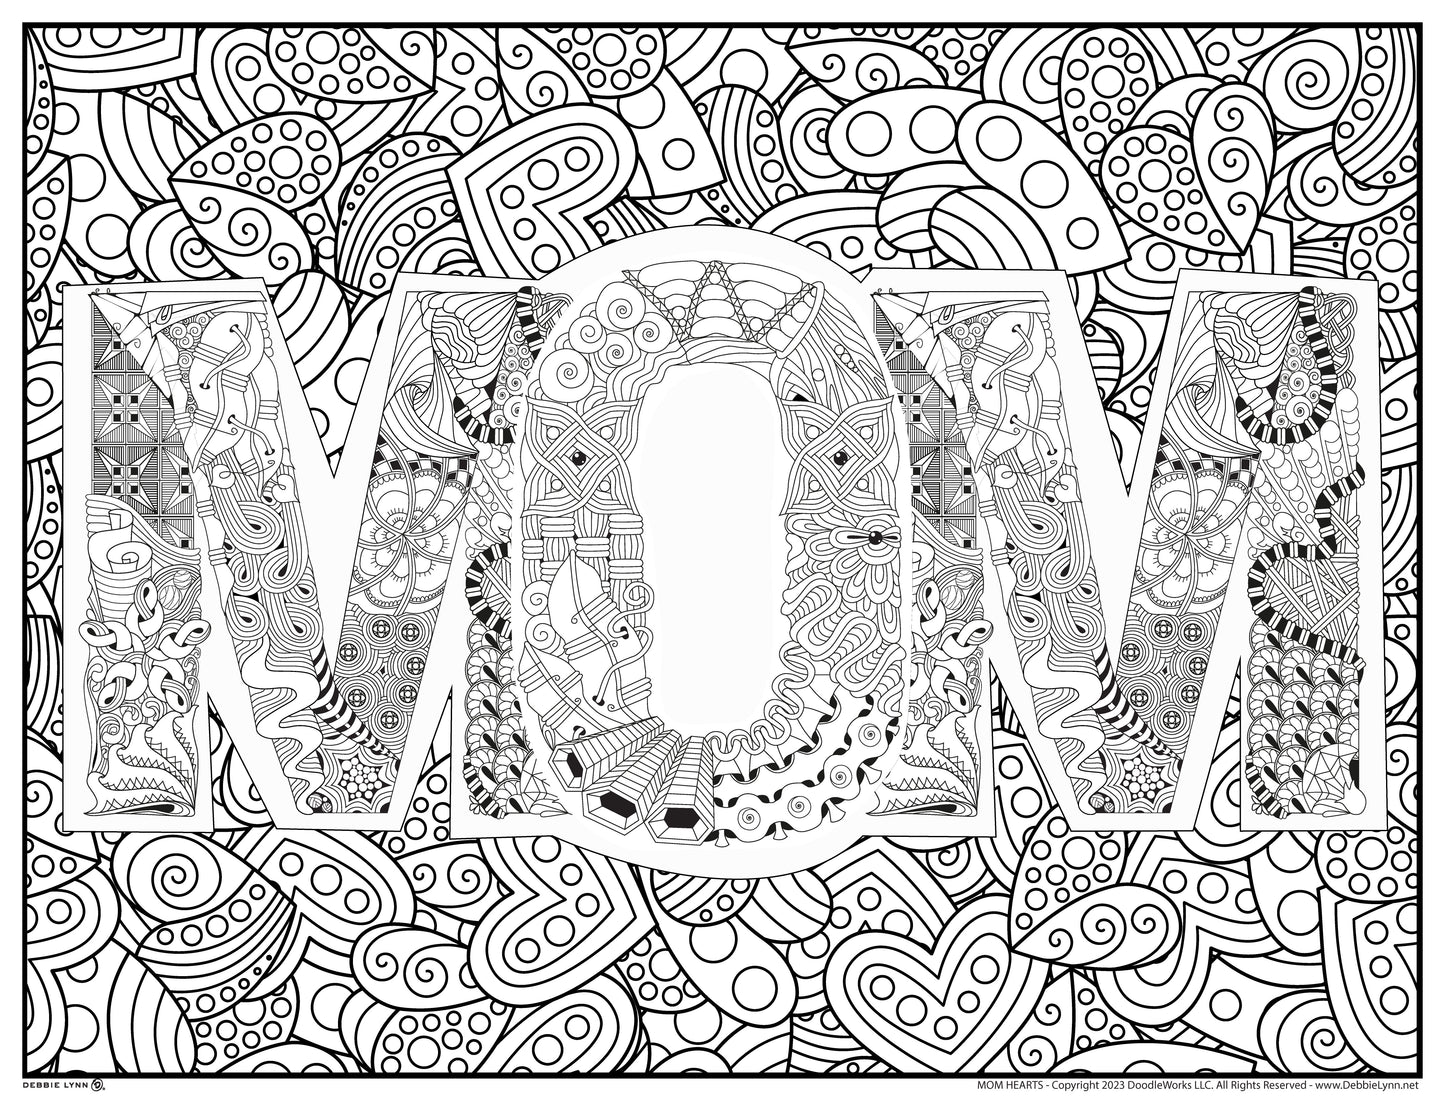 Mom Hearts Personalized Giant Coloring Poster 46"x60"